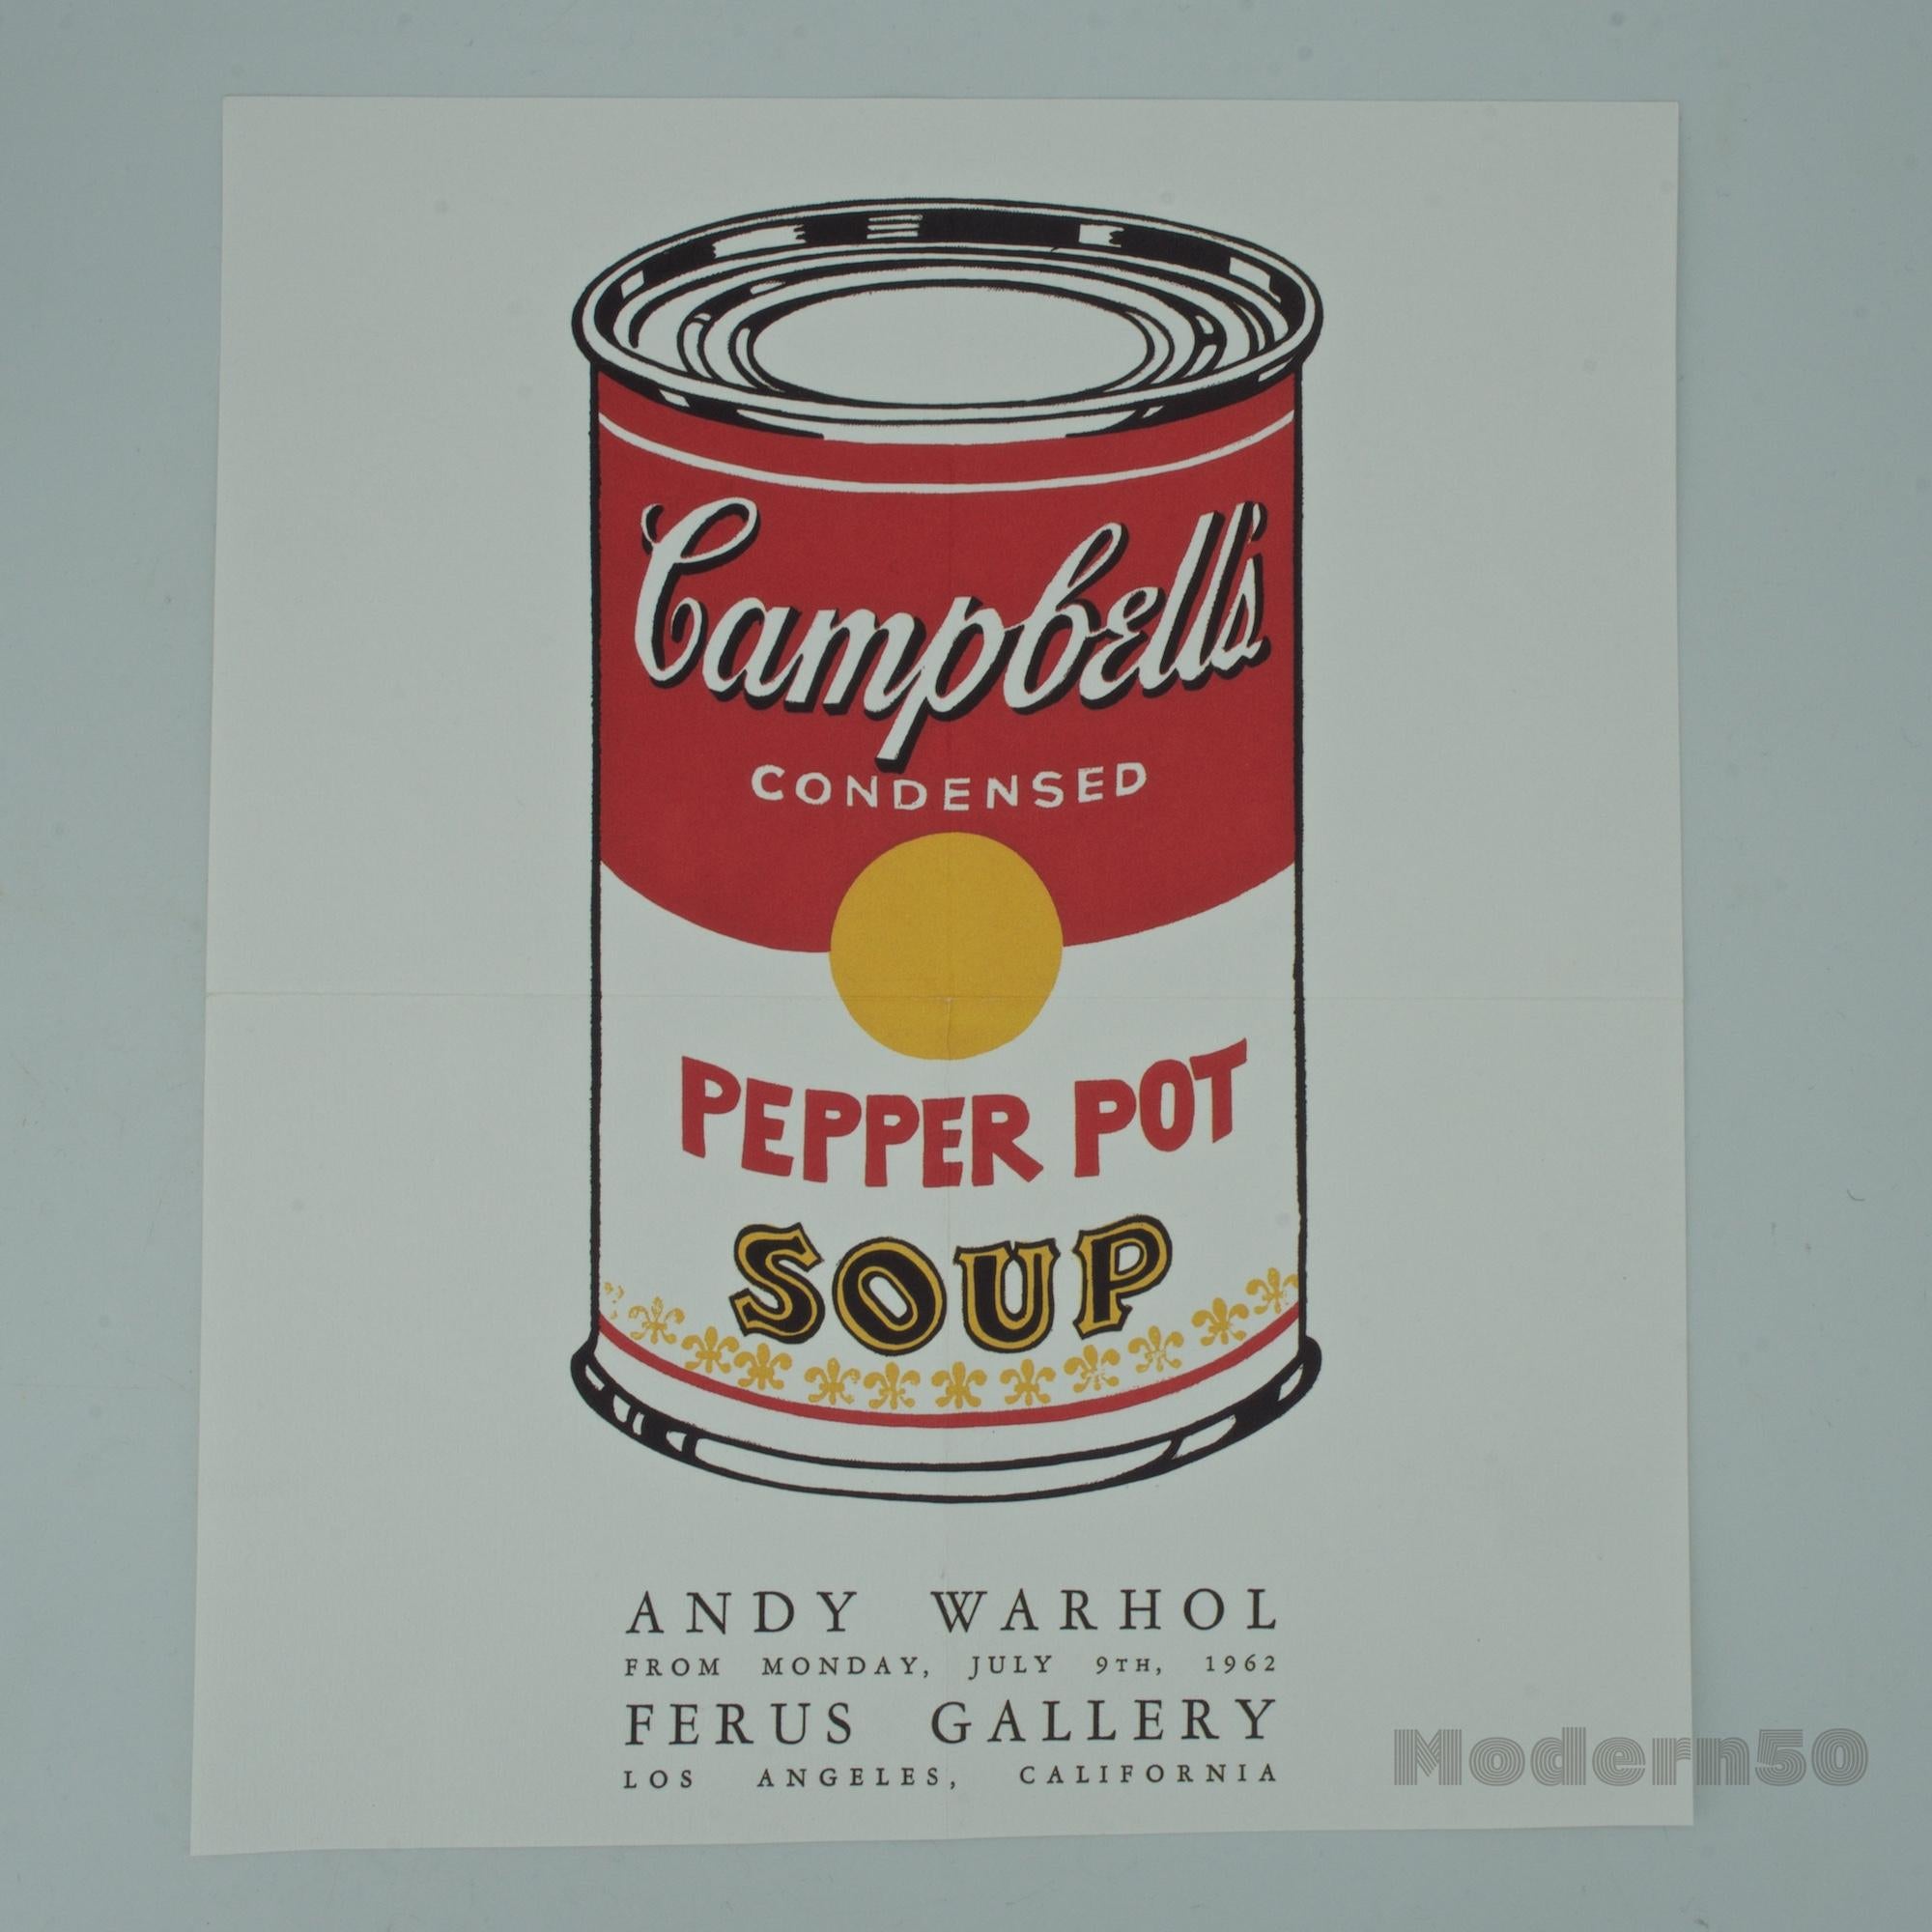 Mid-Century Modern Ferus Gallery Los Angeles Promo Andy Warhol Campbells Soup Can Pop Art Show